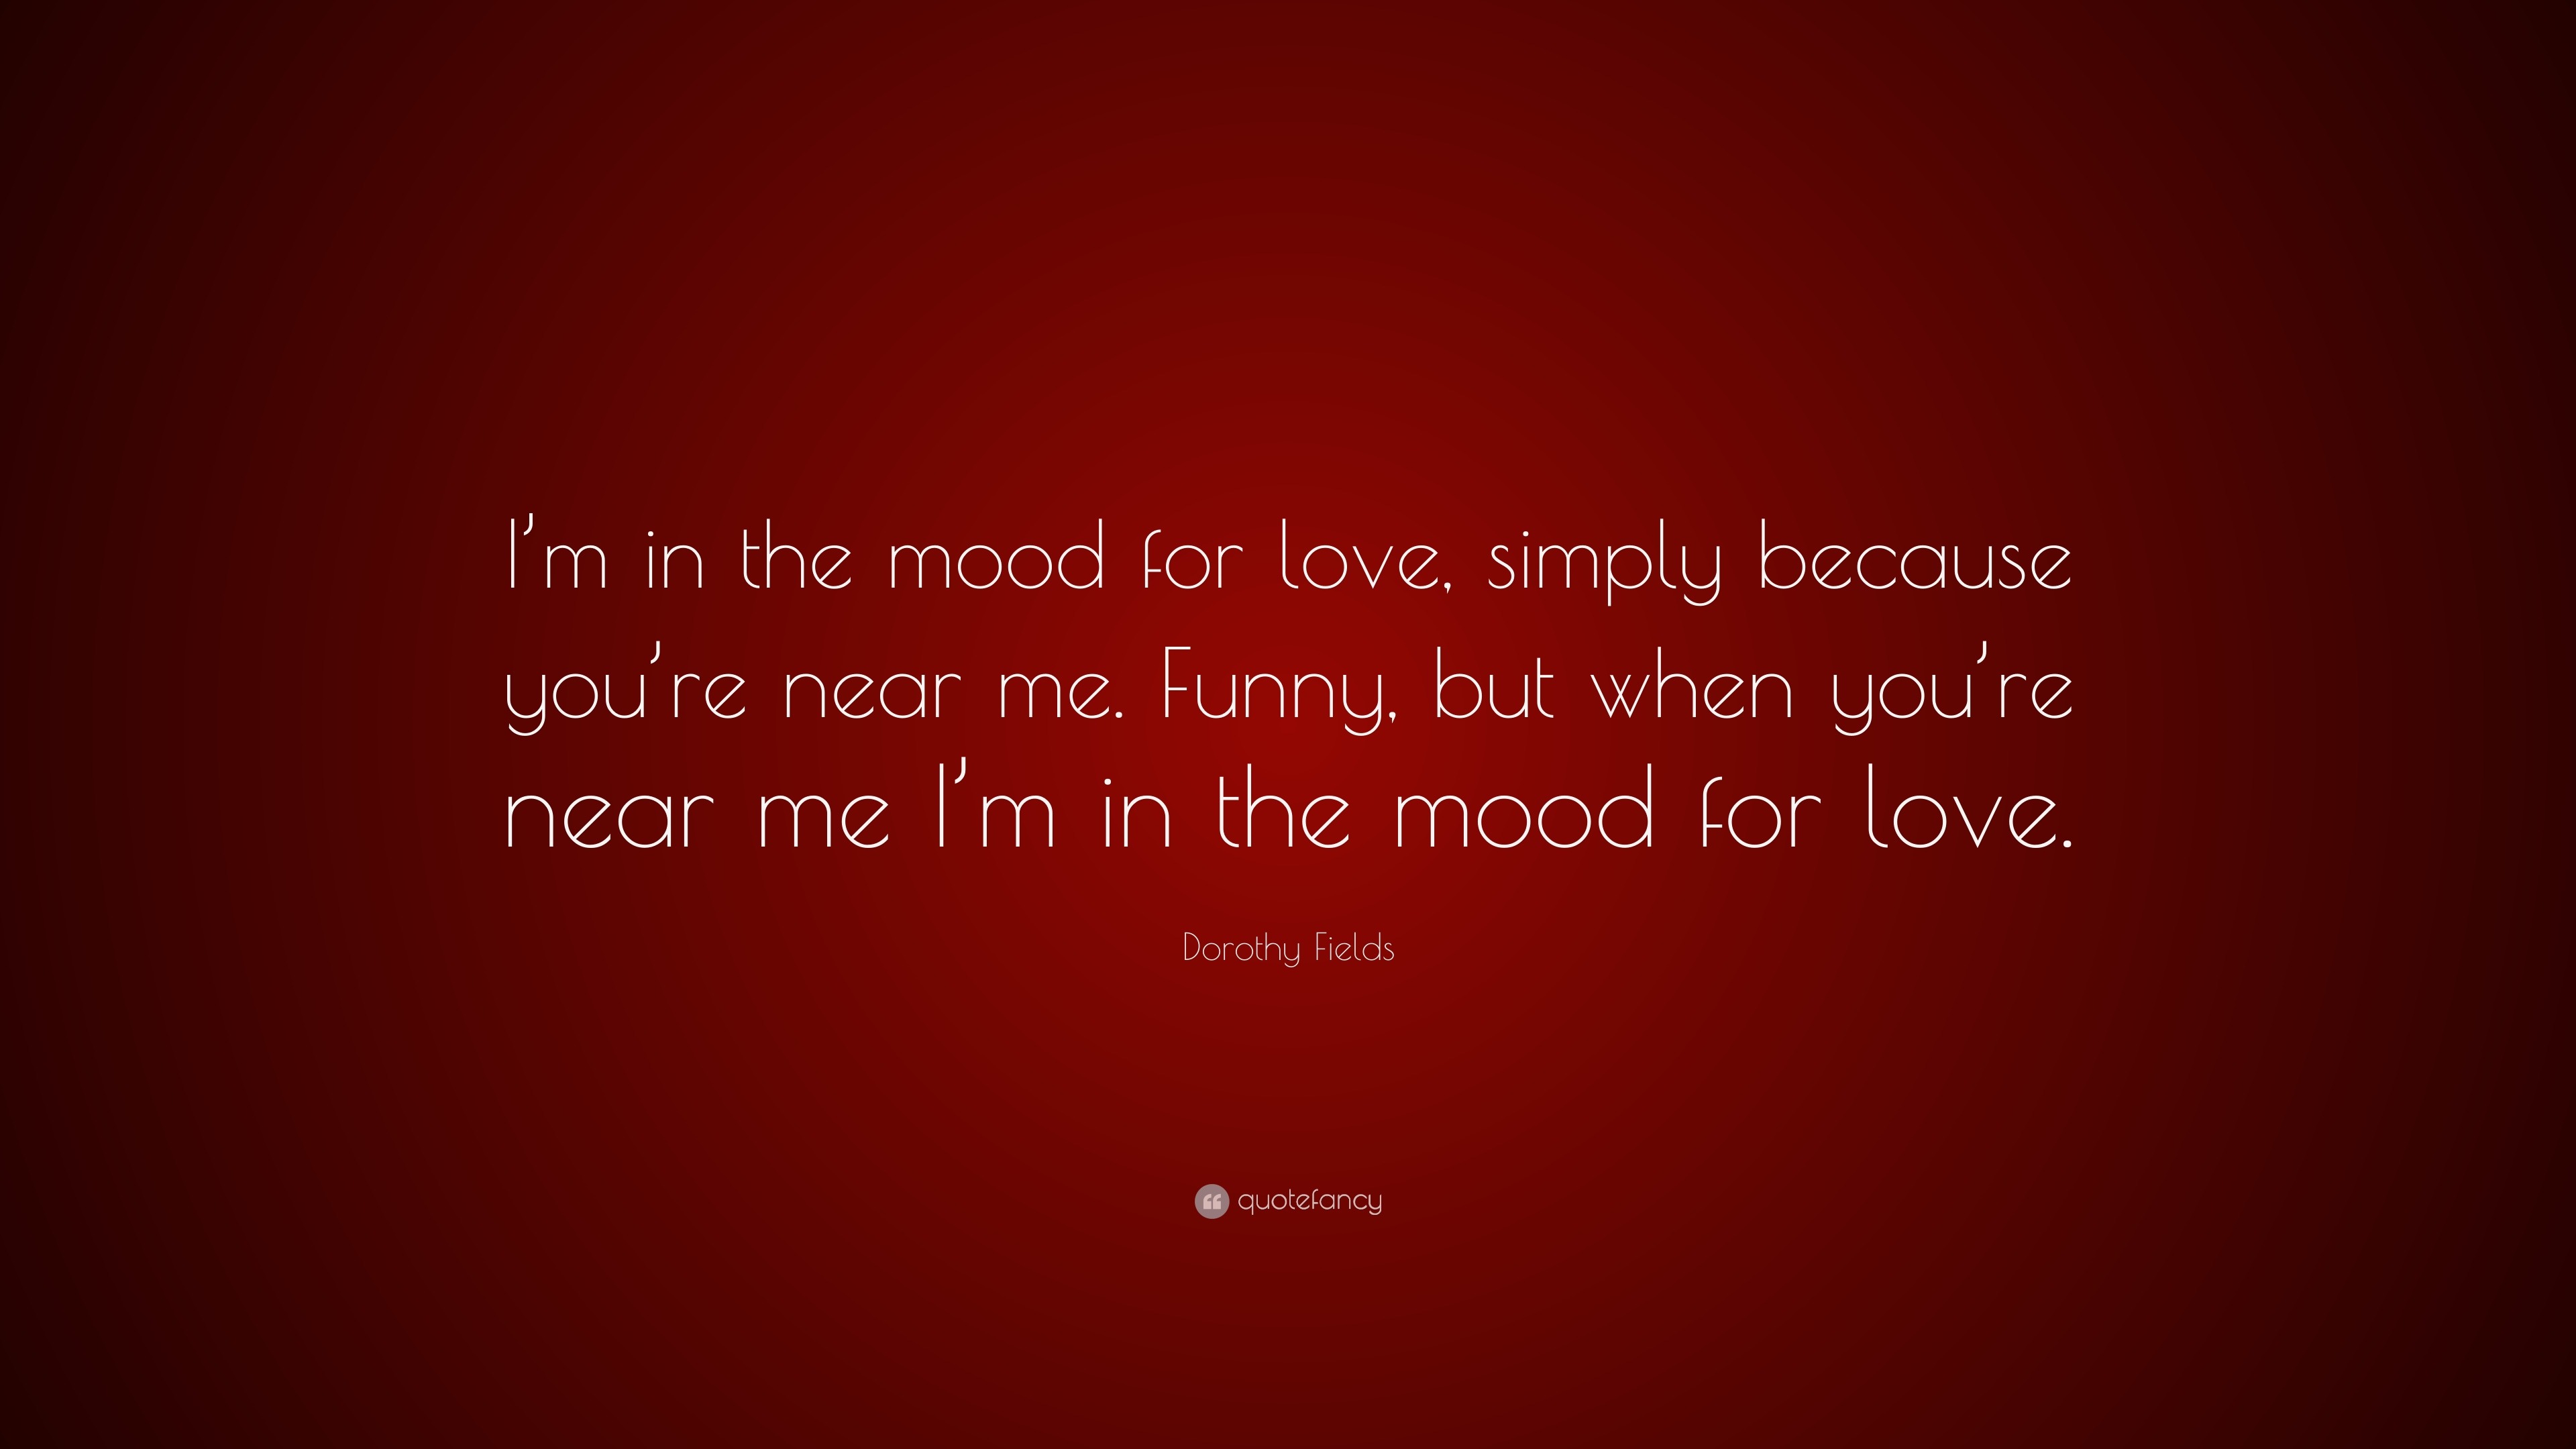 Dorothy Fields Quote: “I'm in the mood for love, simply because you're near  me.